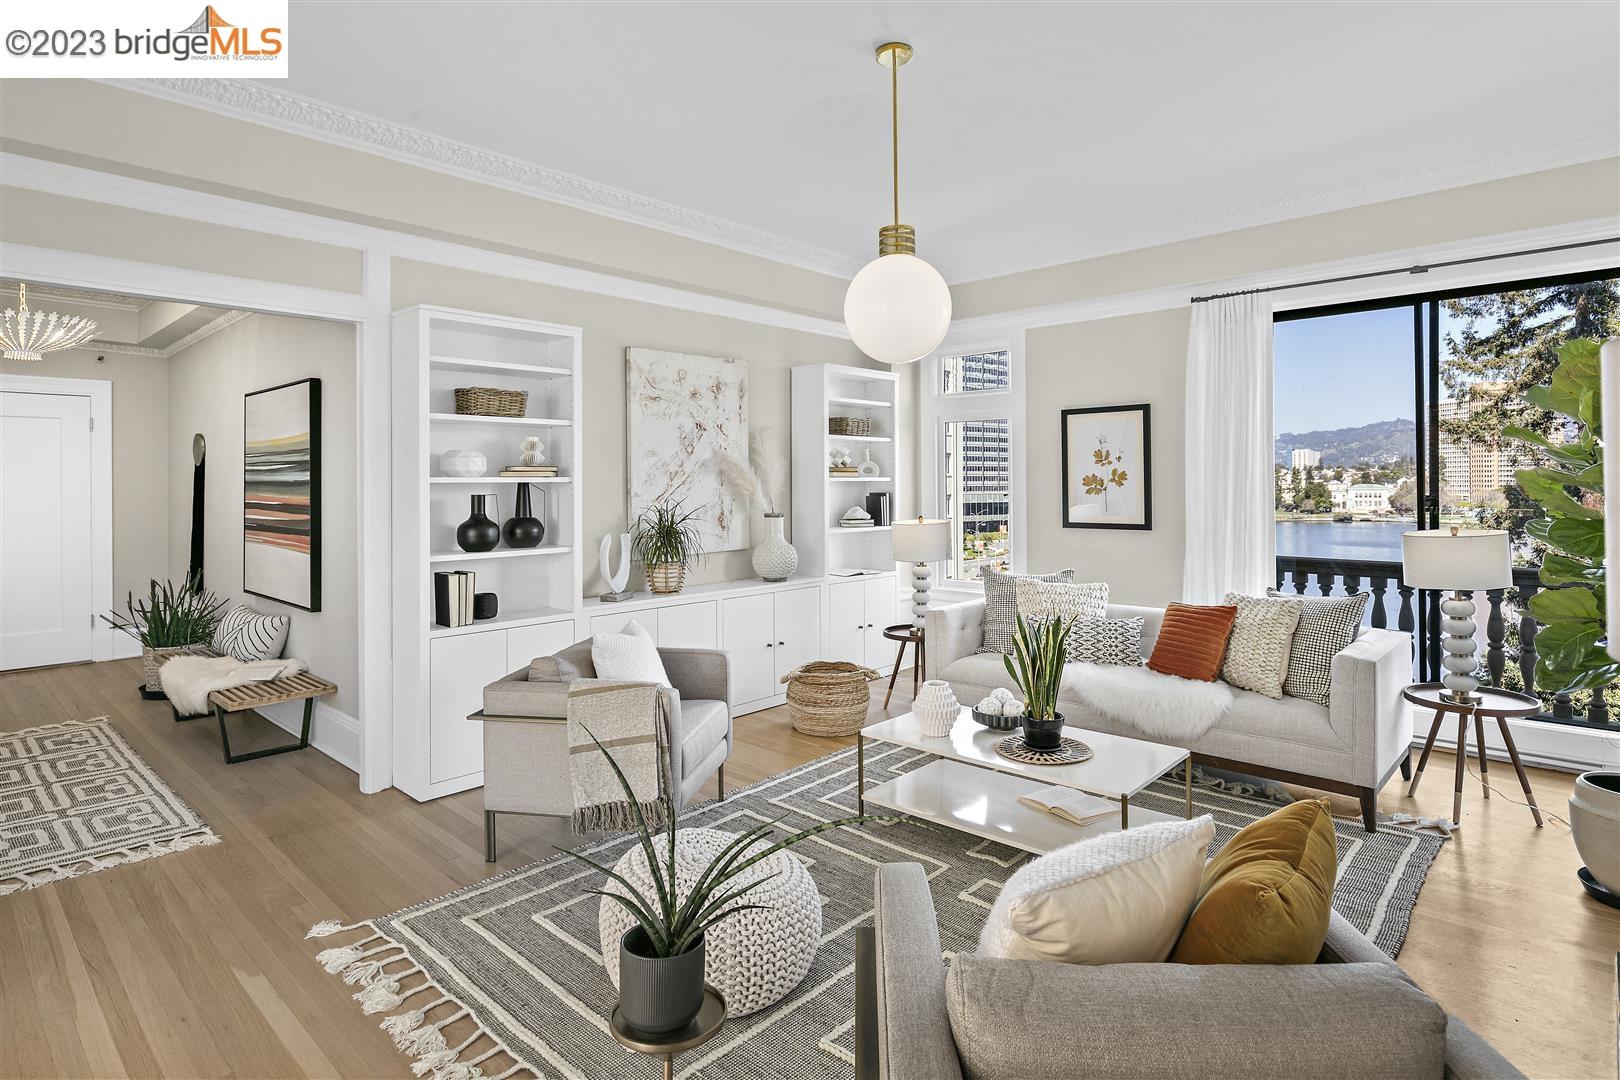 Views, location and elegance are all offered in this stately condo at Oakland's prestigious Regillus on the shores of Lake Merritt! Built in 1924, the historic Regillus is a stunning Beaux Arts residential building filled w/Old World architectural elements & details. Spacious at 1,759 SF, the home is one of only seven 3BR units in the building & features 2BA, formal living/dining rooms, an updated eat-in kitchen & a designated indoor parking space. Located on the 5th floor, the home boasts sweeping Lake Merritt, Oakland city + hills views from light-filled rooms w/10-foot ceilings. Original features include ornate crown moulding, oak floors, an impressive fireplace & handsome stone balustrade balconies visible from most rooms. The building's gracious design includes a circular cobblestone driveway, a spectacular front door & a beautiful private garden + terrace for homeowners & guests. Amenities include an attended reception desk, an elevator, bike room & private storage. Rarely does an Oakland condominium come to market in a building as steeped in Oakland's architectural history as this one. This highly sought-after location offers convenient access to Whole Foods + Trader Joe's, Uptown/Grand Lake restaurants, farmers markets, BART & freeways. Walk Score 97, Transit Score 85!